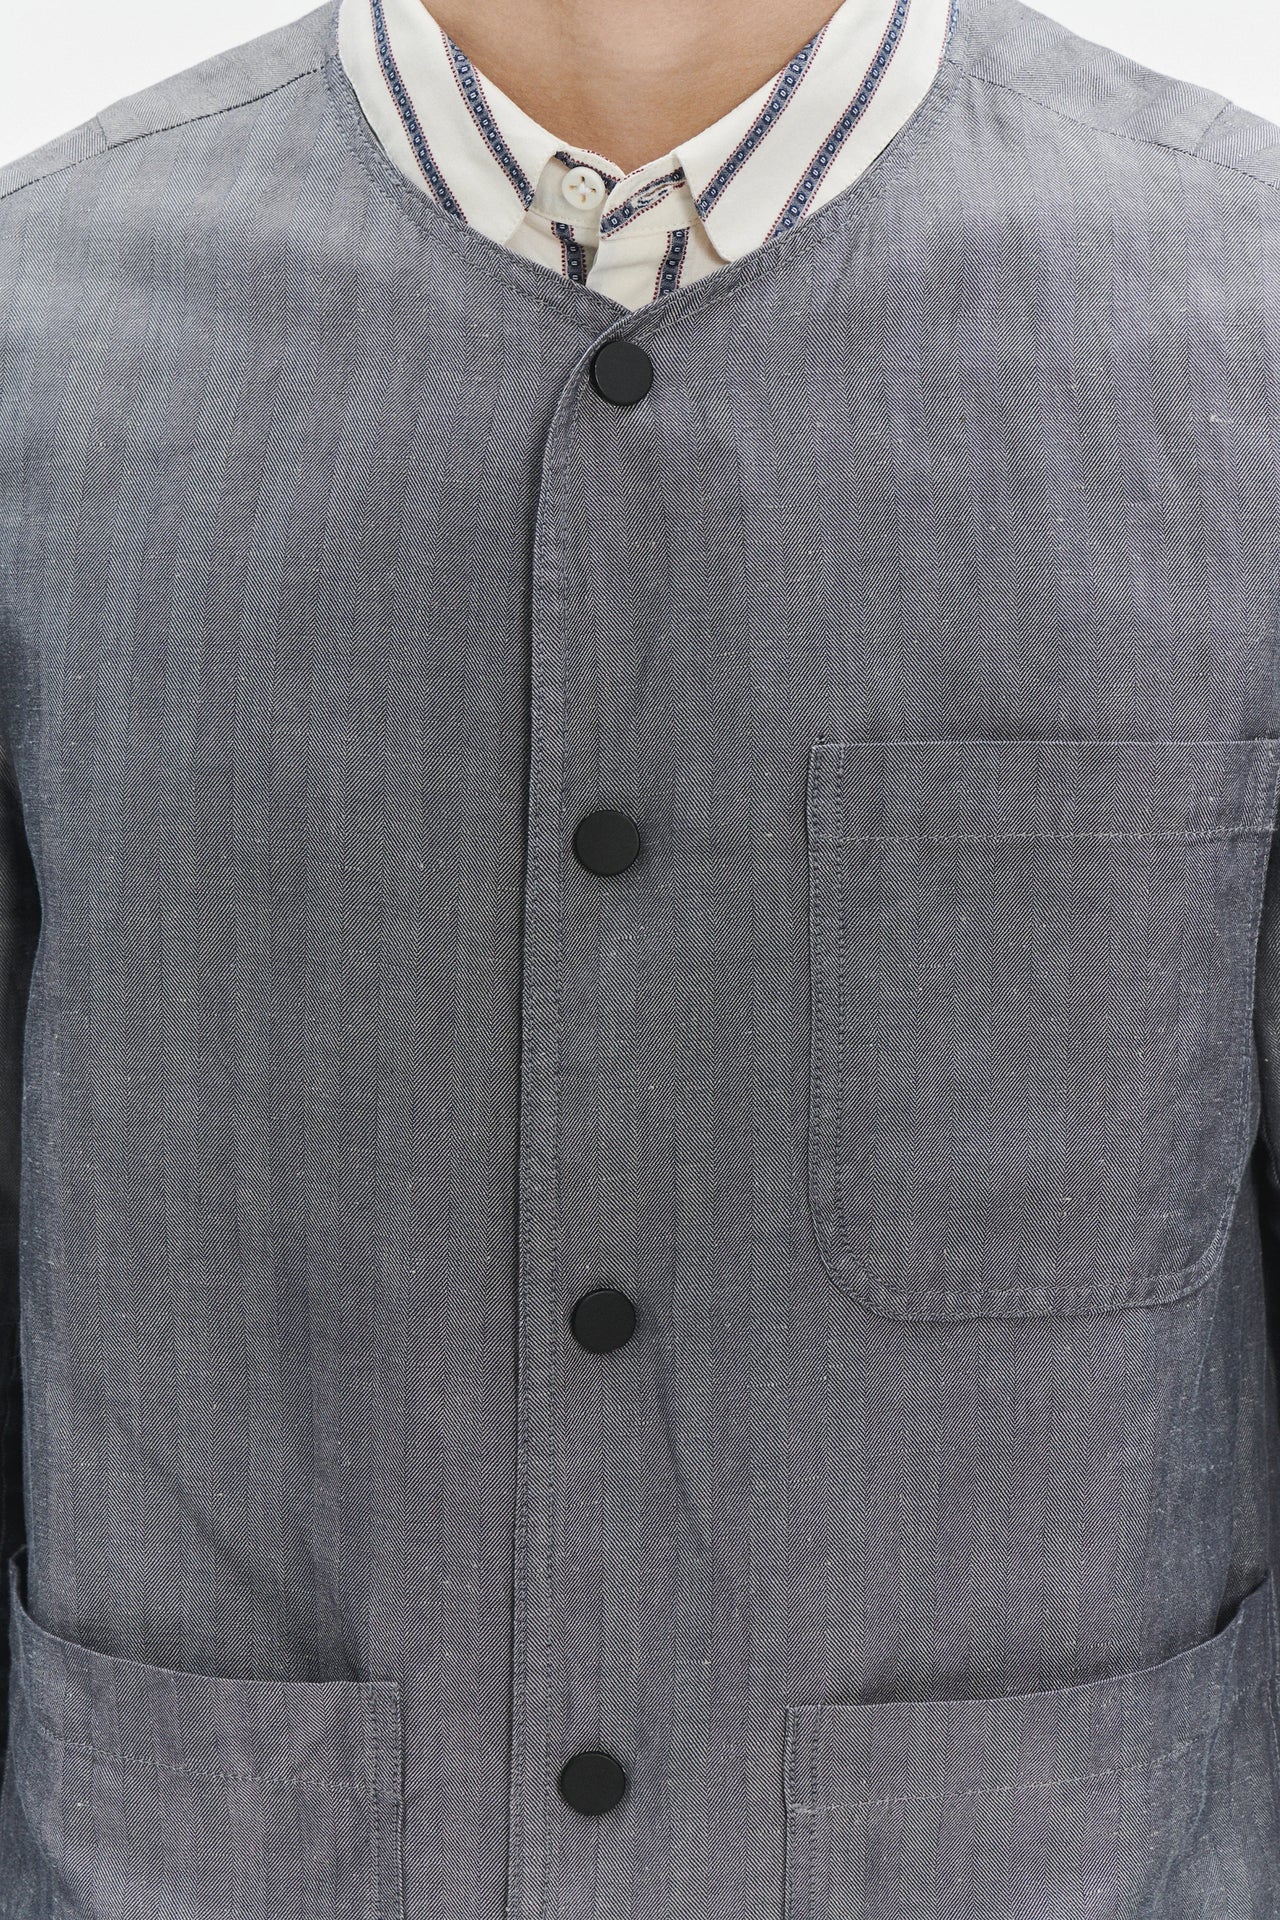 Round Collar Jacket in a Very Fine Grey and Blue Blend of Herringbone Italian Linen and Cotton